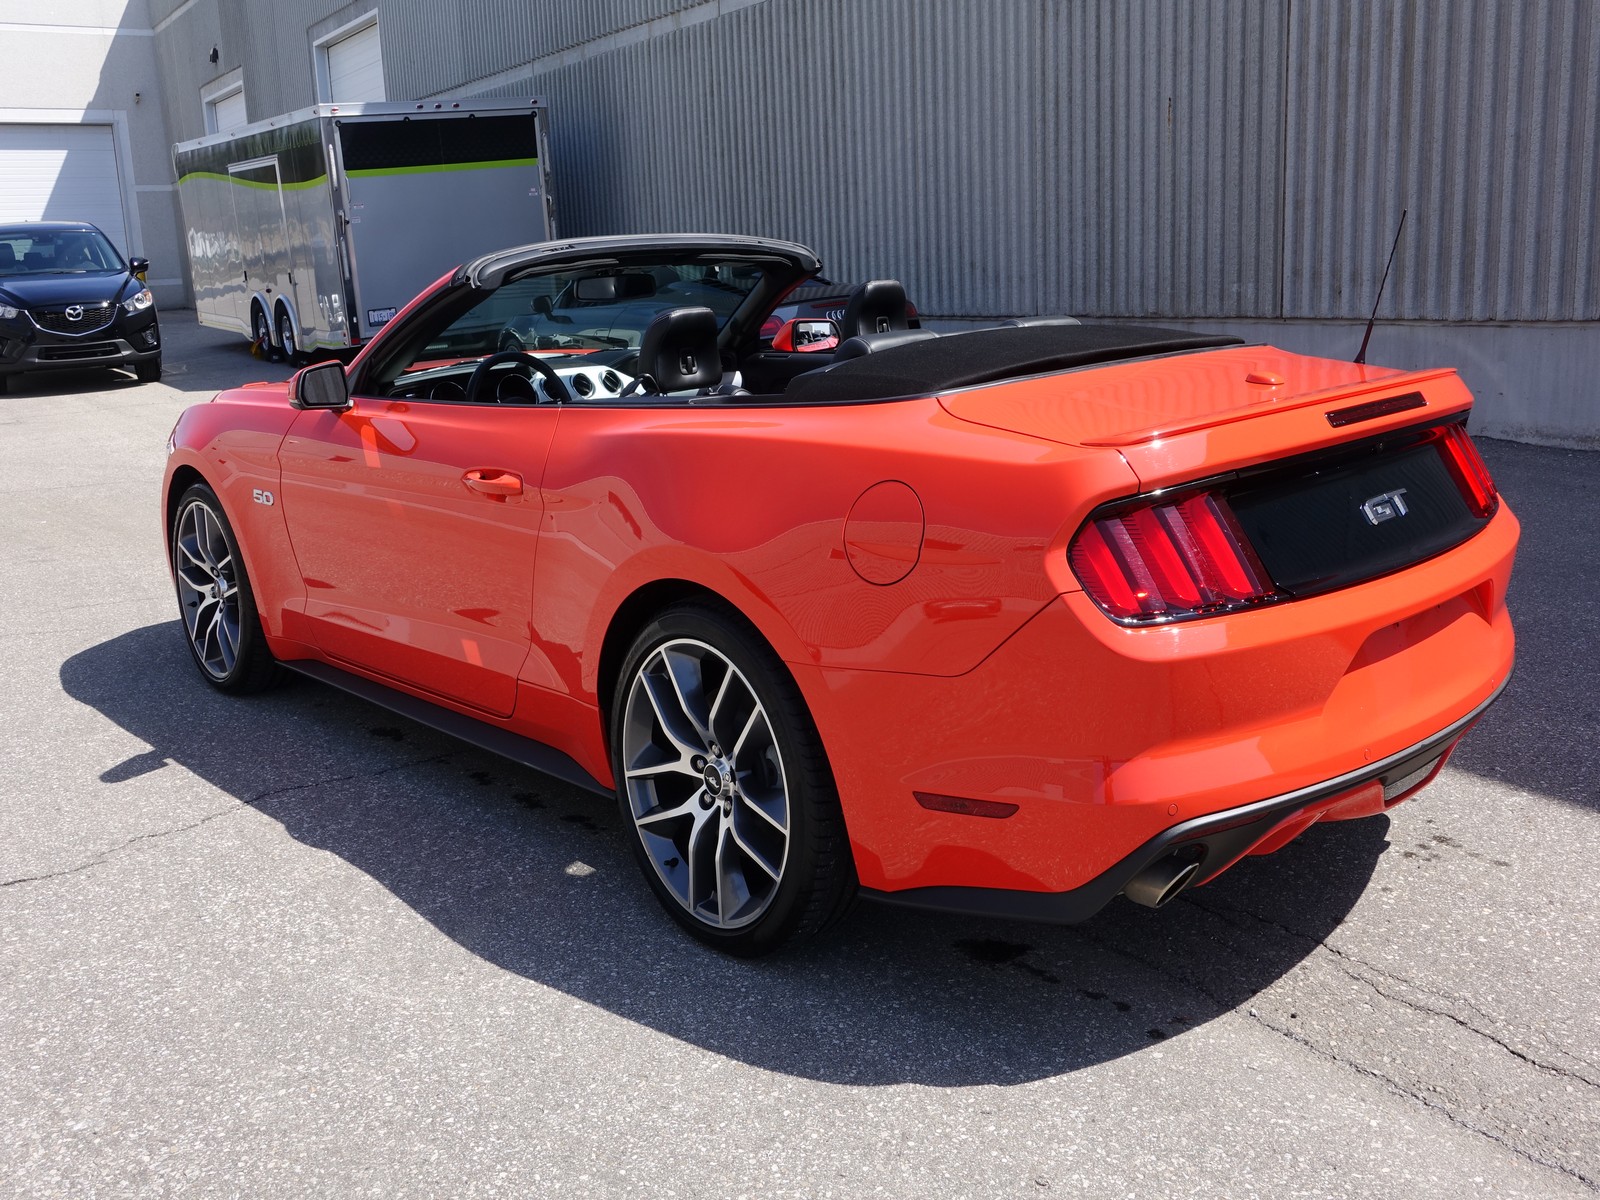 Used 2015 Ford Mustang Convertible Pricing & Features ...